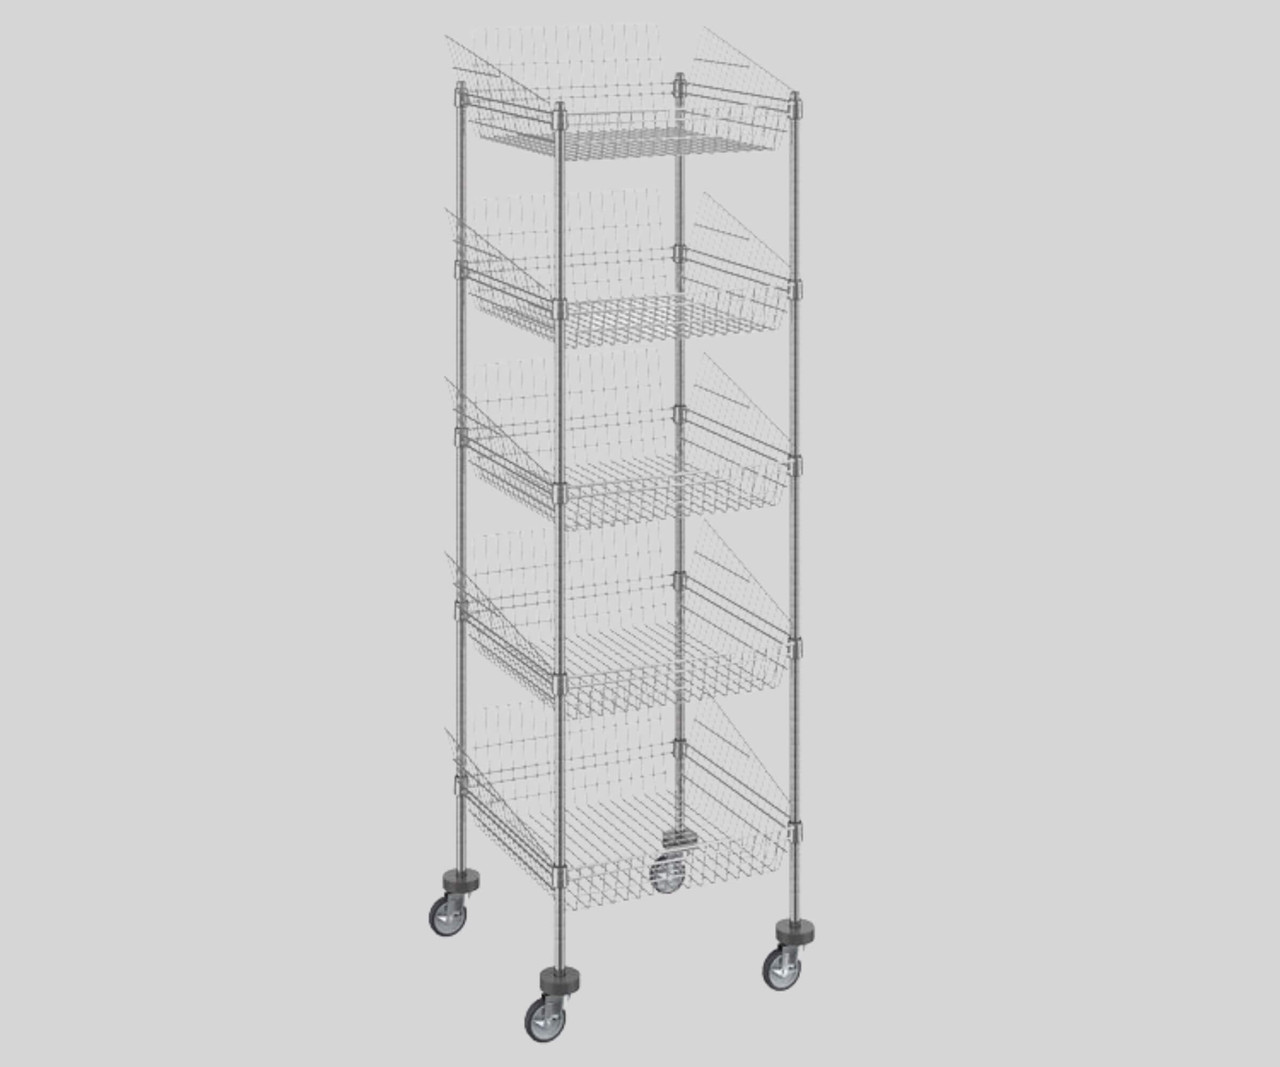 Chicken Pieces CP 24" x 24" x 80" NSF Chrome Mobile 5 Basket Retail Storage Display Stand - Organize and Display Products Effortlessly